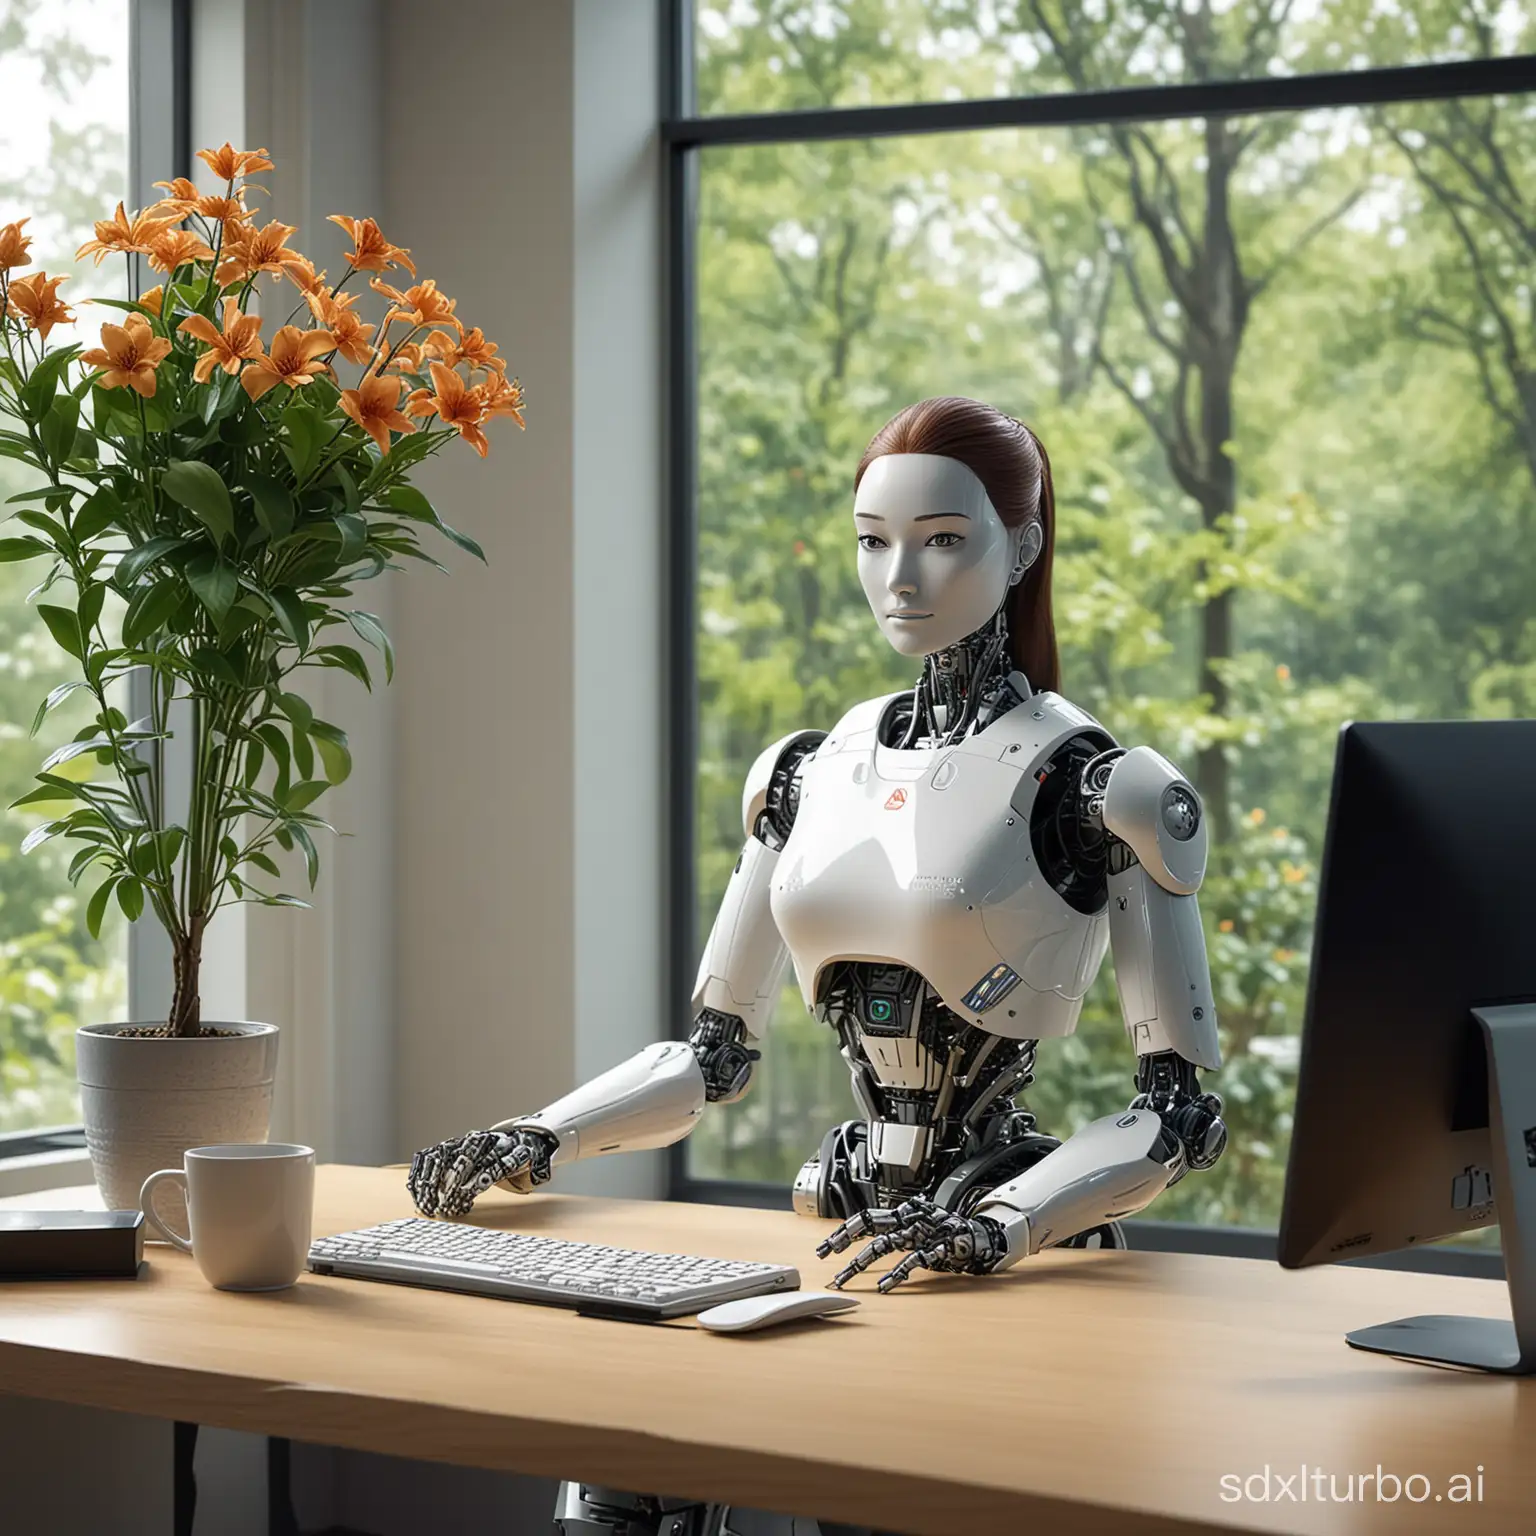 The female robot has a Huawei log emblazoned on it,is staring intently at the monitor in front of it, side view，which shows a code editor, alongside a laptop and some files.  In addition, there is a cup of coffee and a potted plant  and a  bouquet of flowers on the desk, elements that add a touch of life to the scene and make the robot's image seem more humanized. In the background, a large window brings plenty of light into the room, and the trees outside the window are faintly visible, adding a touch of nature to the whole scene. The layout of the whole office is simple and modern, full of futuristic feeling, but also reveals a cozy and peaceful atmosphere